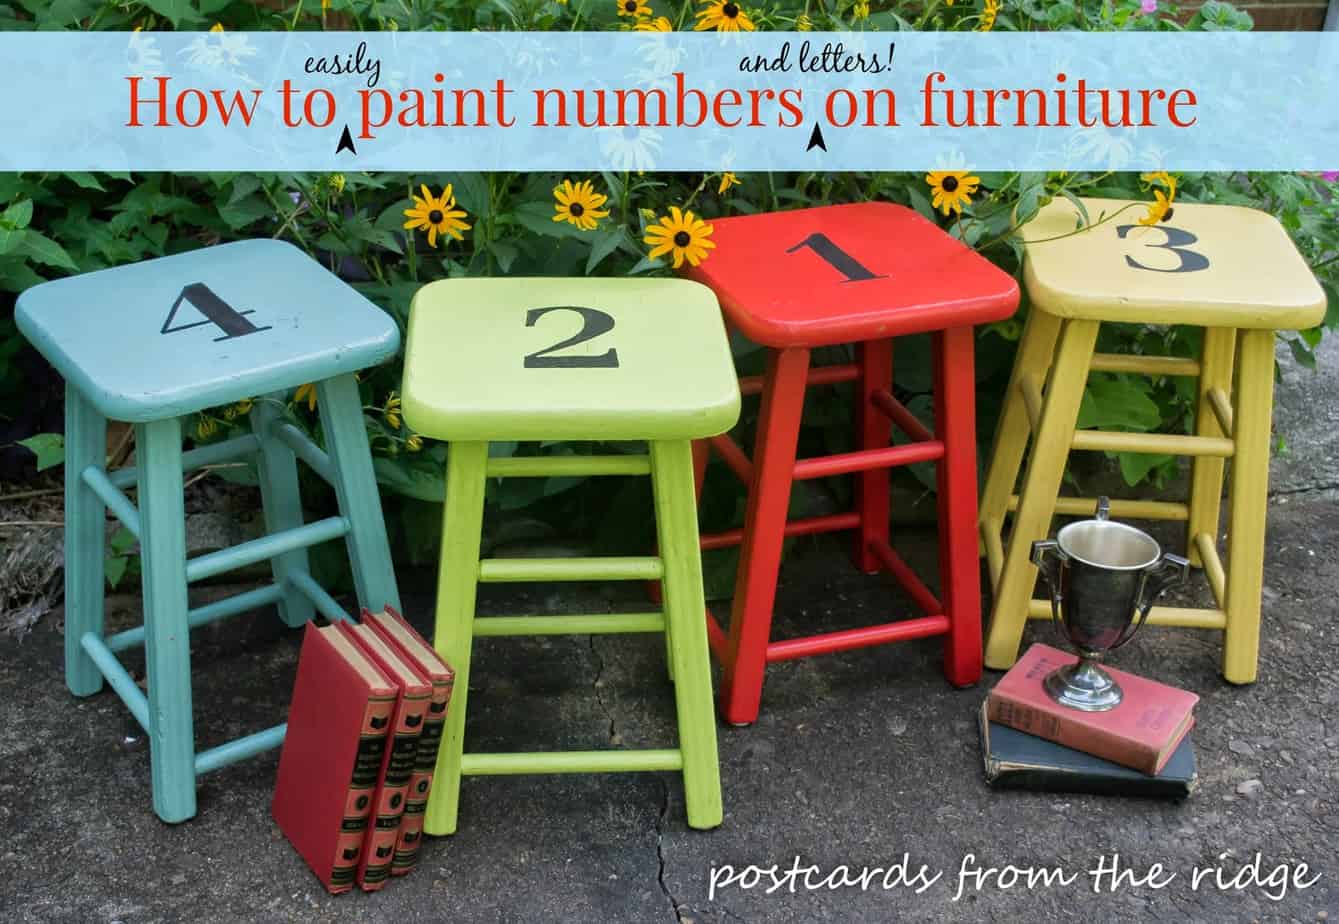 How to easily paint numbers or letters on furniture